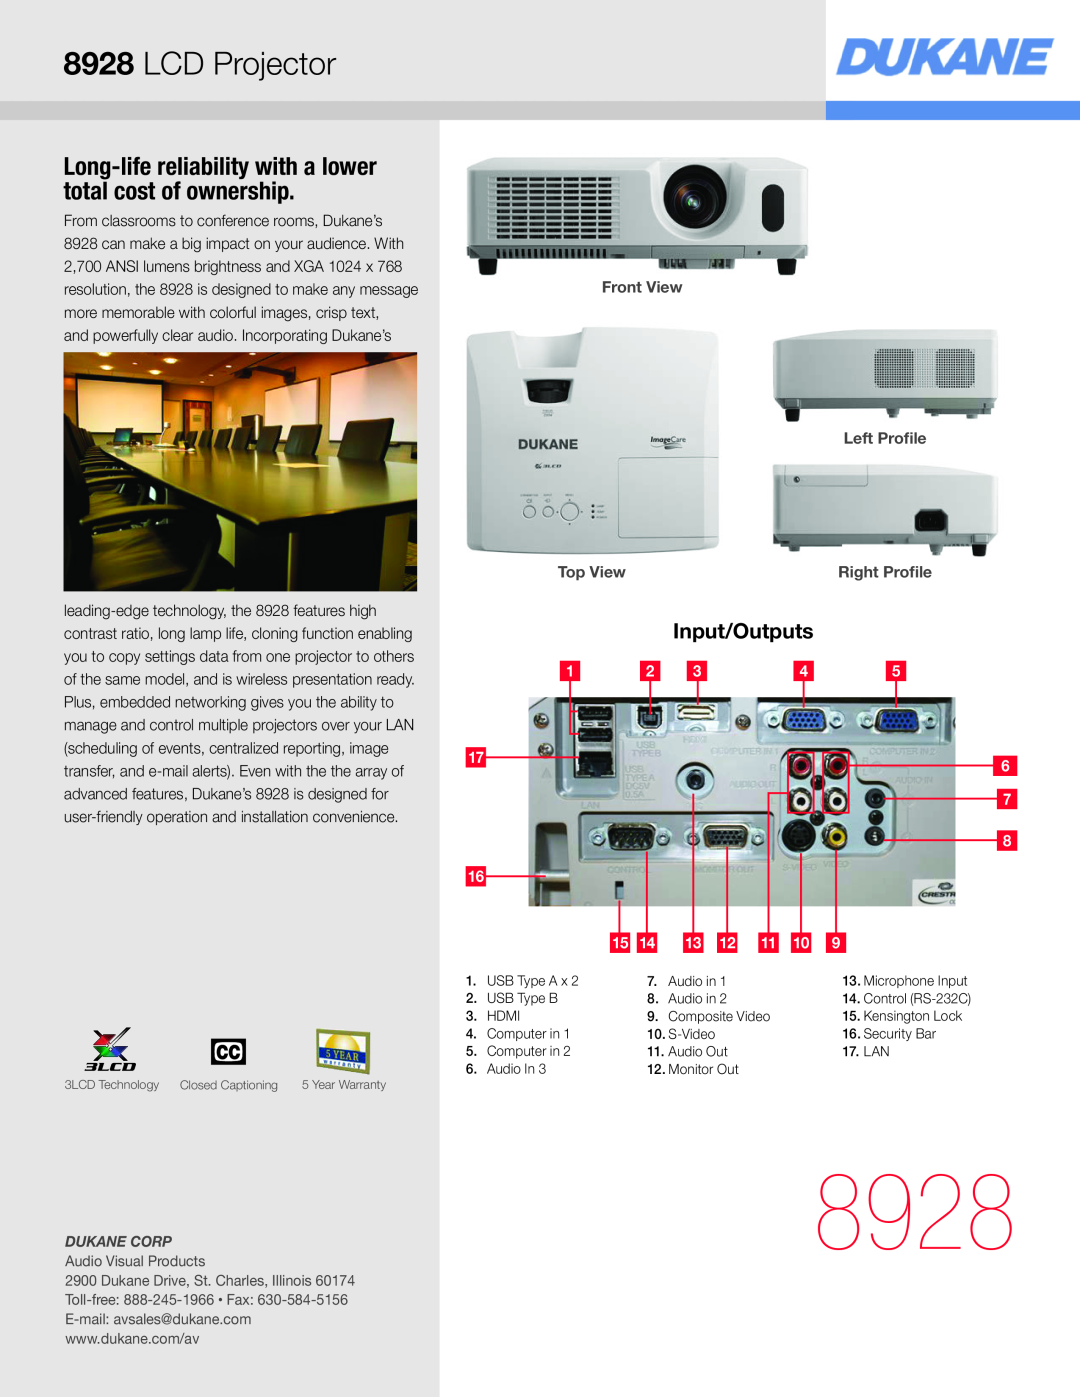 Dukane 8928 warranty LCD Projector, Long-life reliability with a lower total cost of ownership, Input/Outputs, Top View 